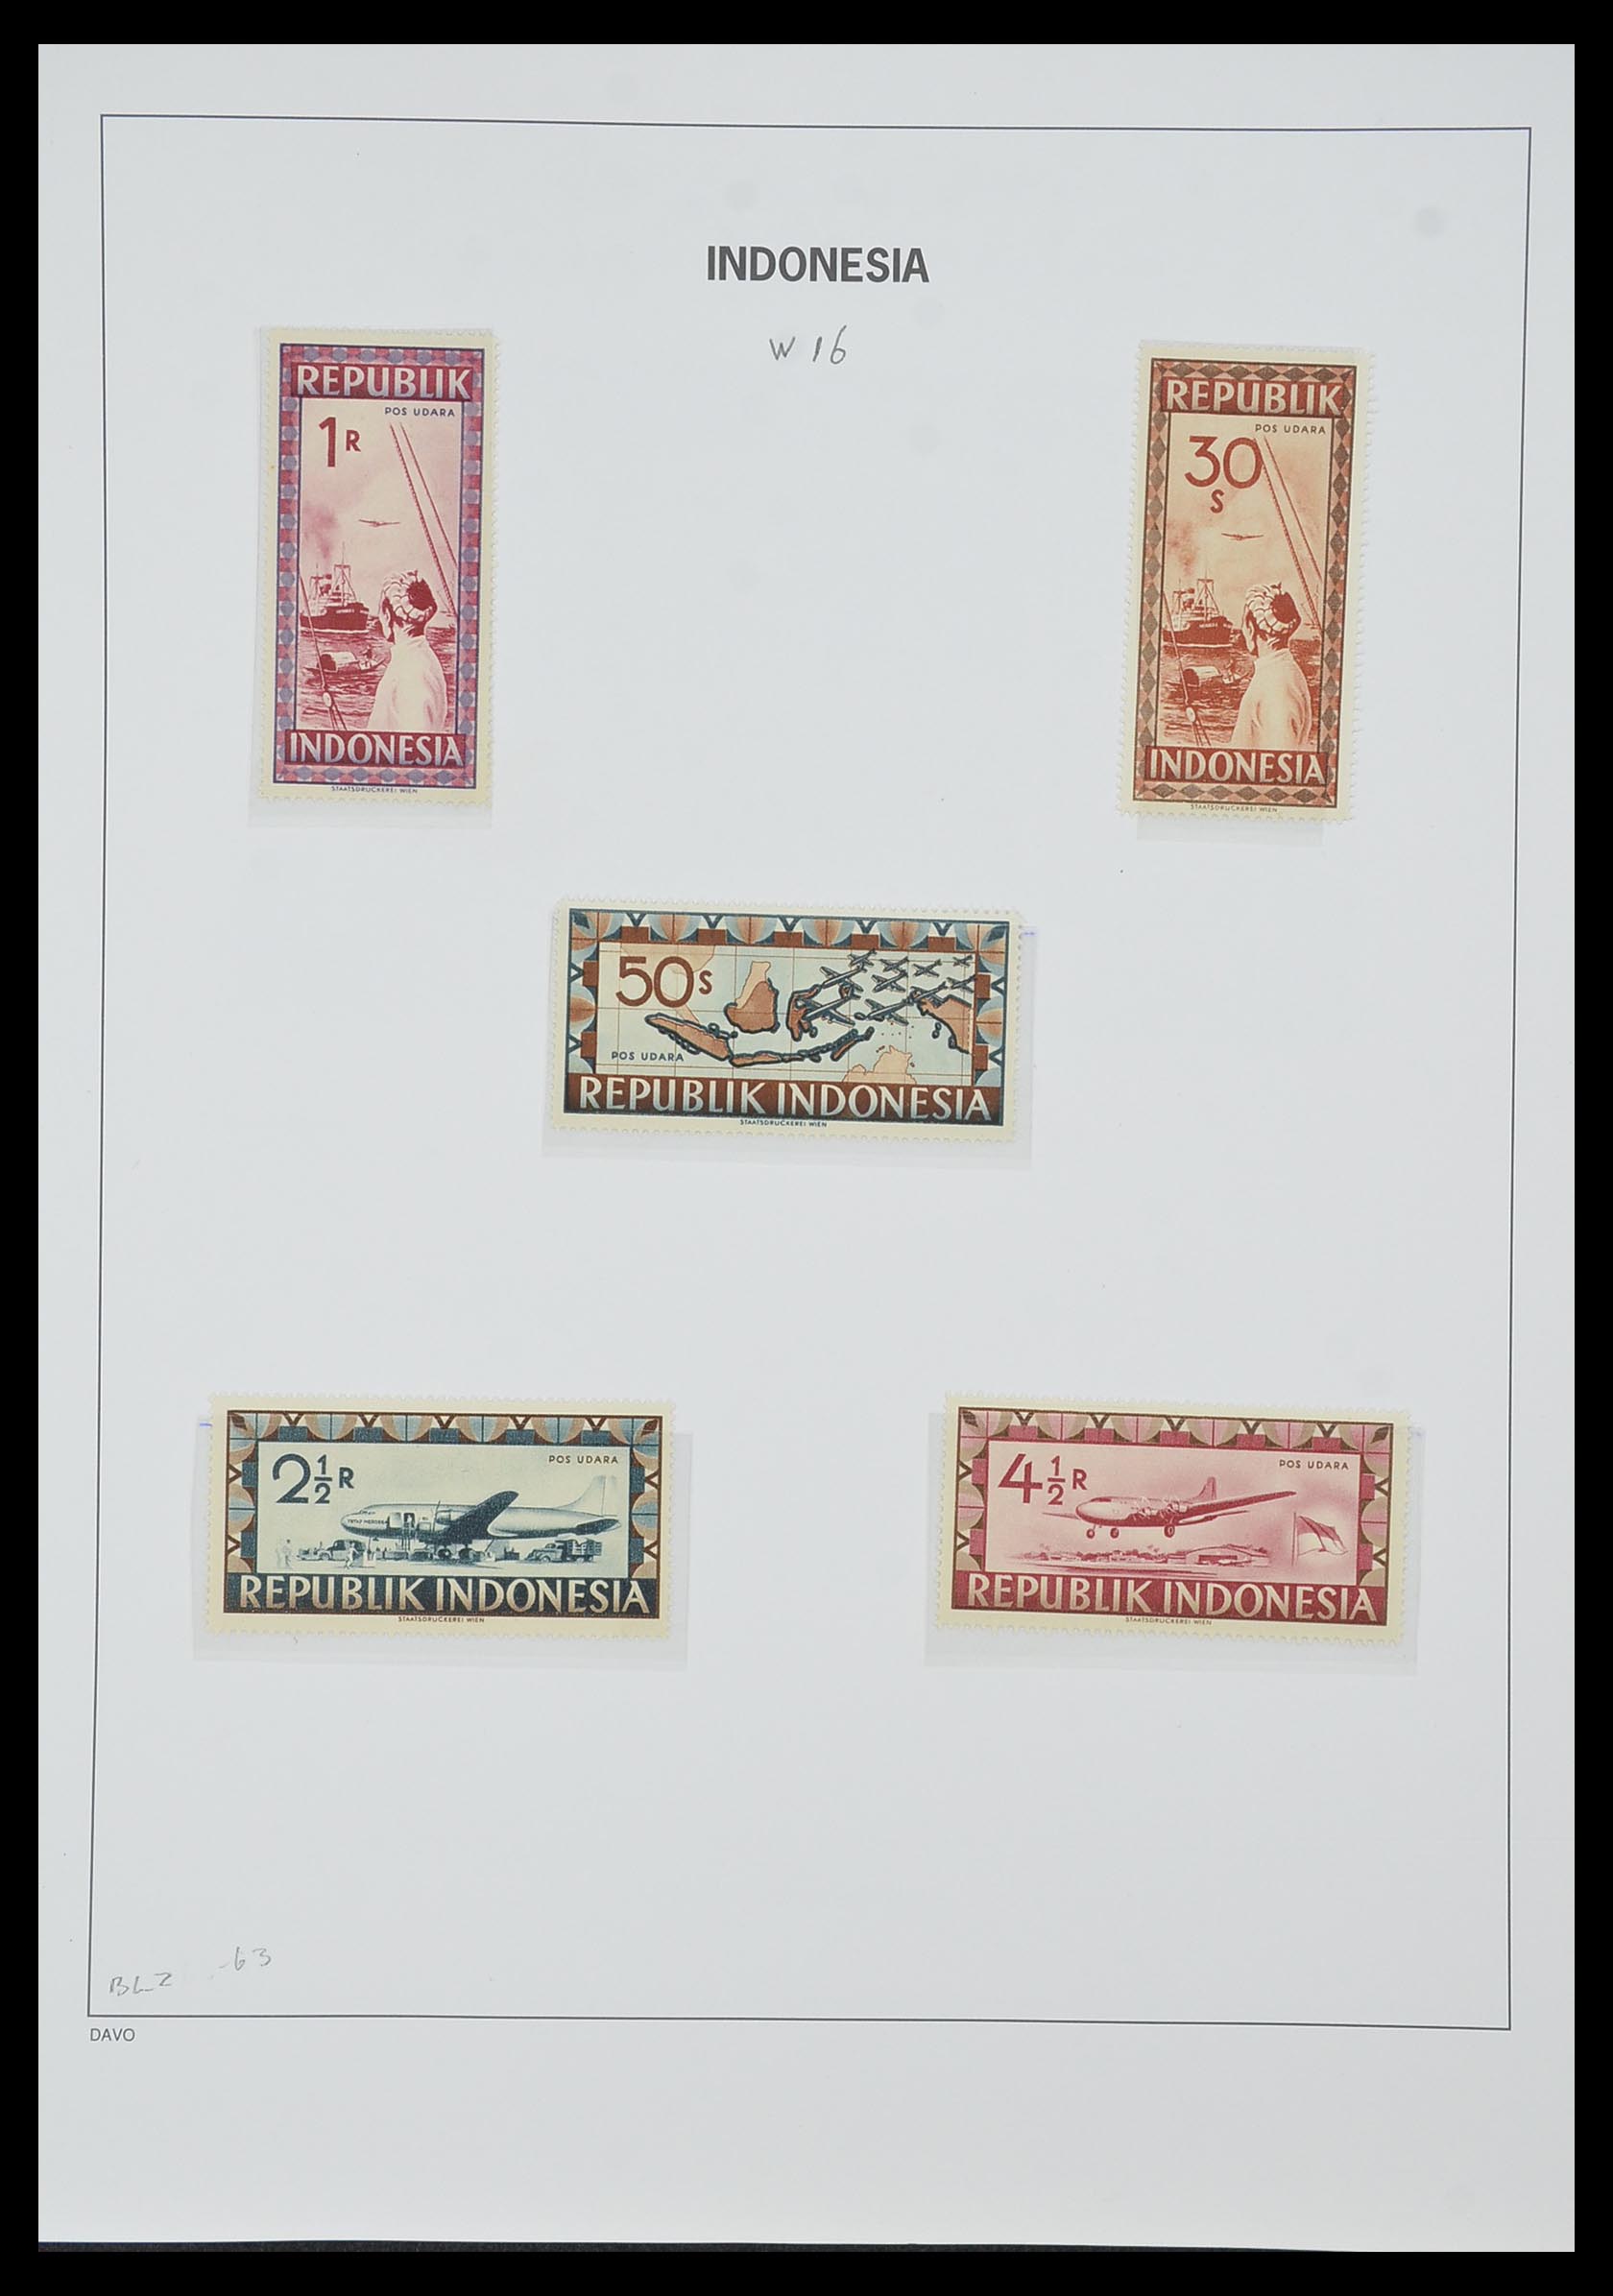 33988 028 - Stamp collection 33988 Vienna printings Indonesia.